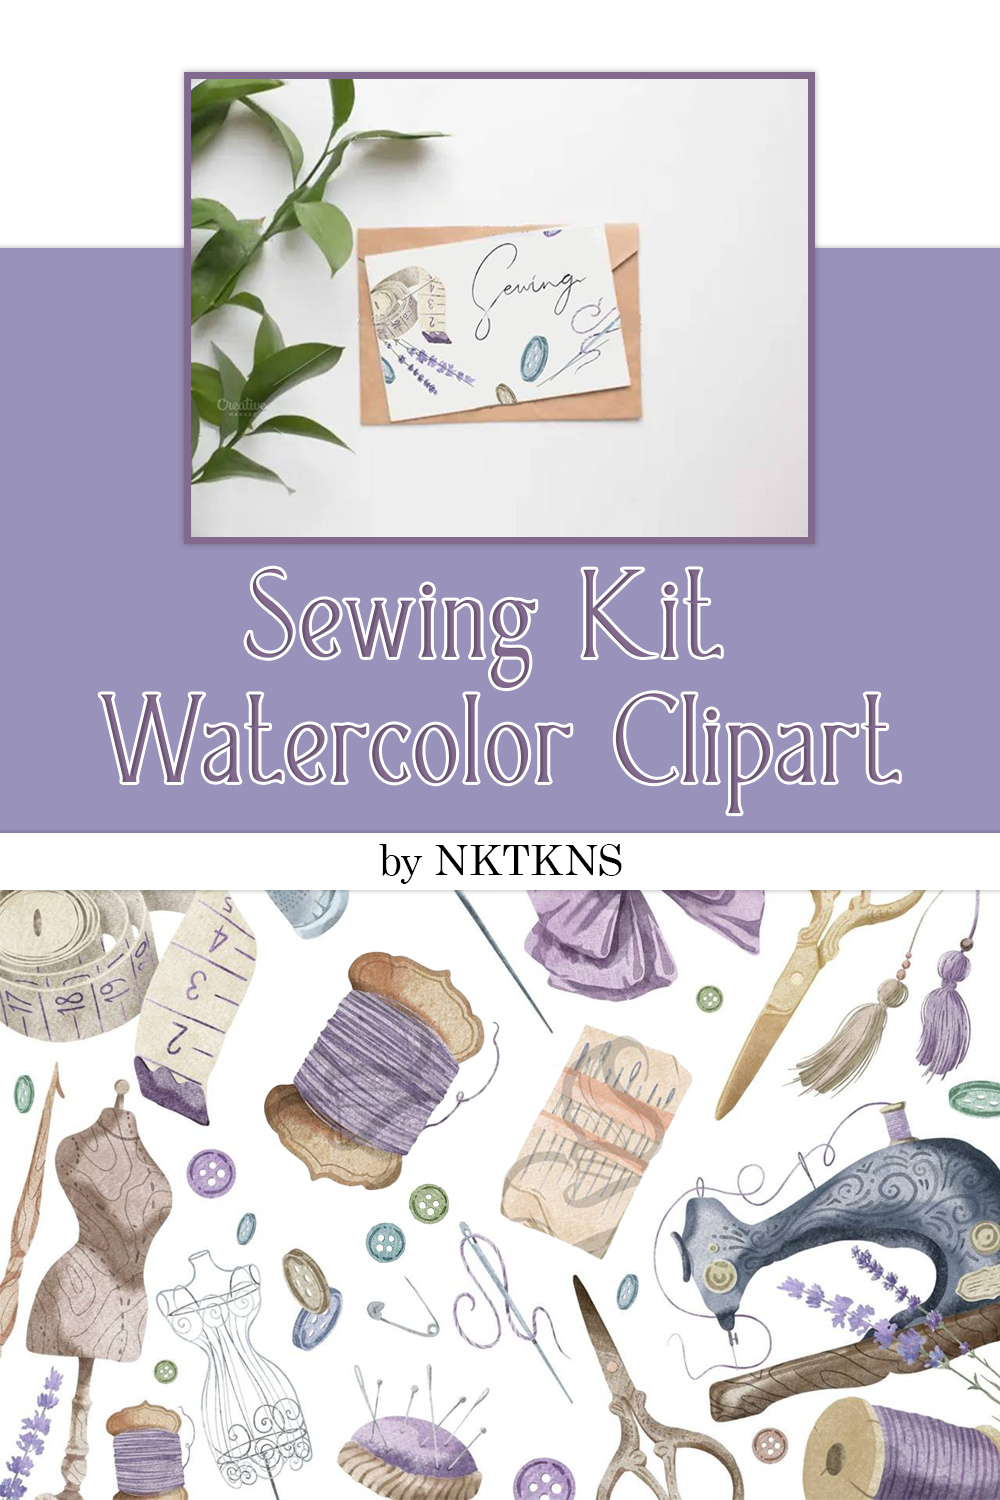 Sewing kit watercolor clipart of pinterest.